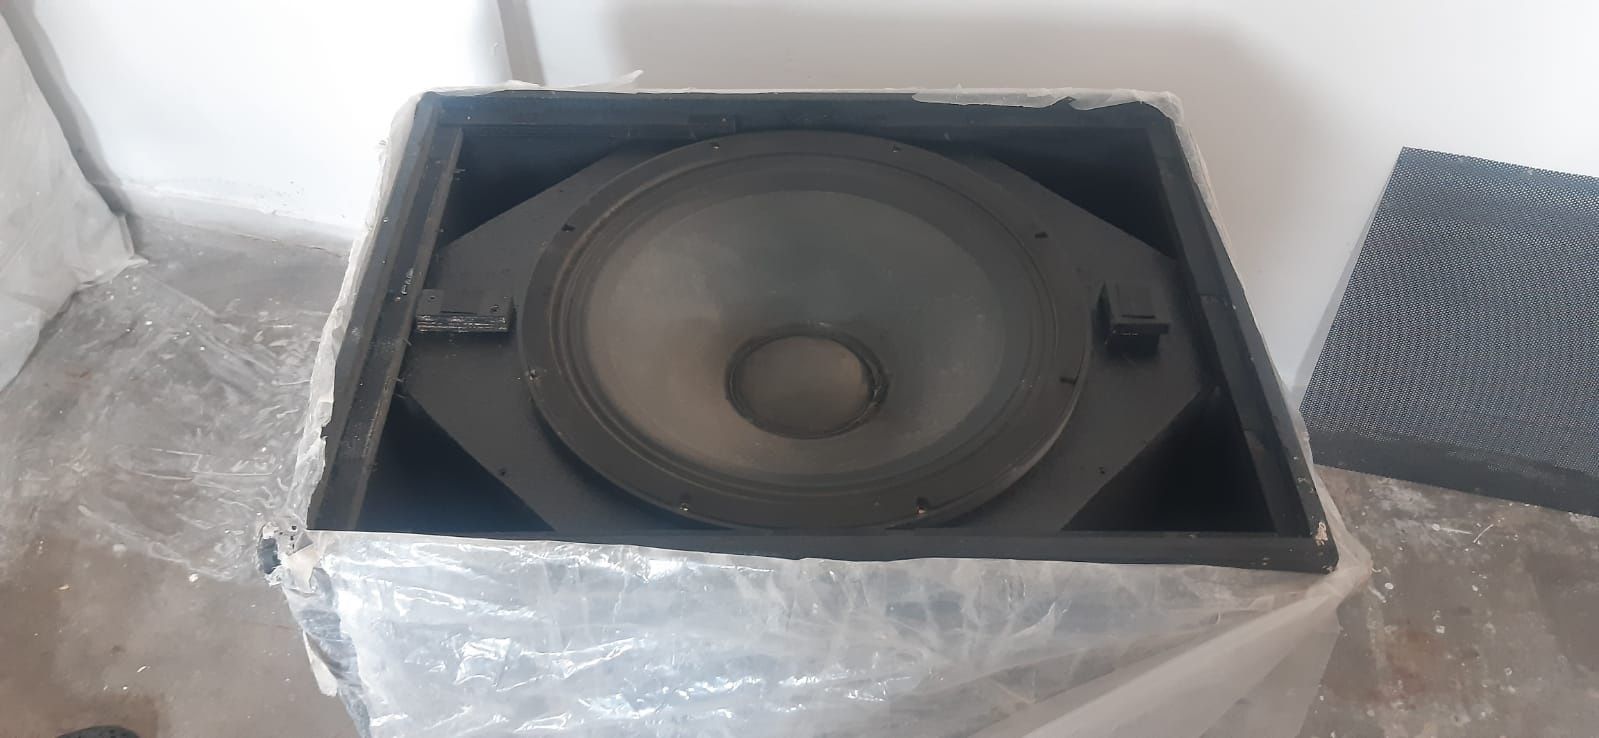 Boxe Subwoofer Profesional